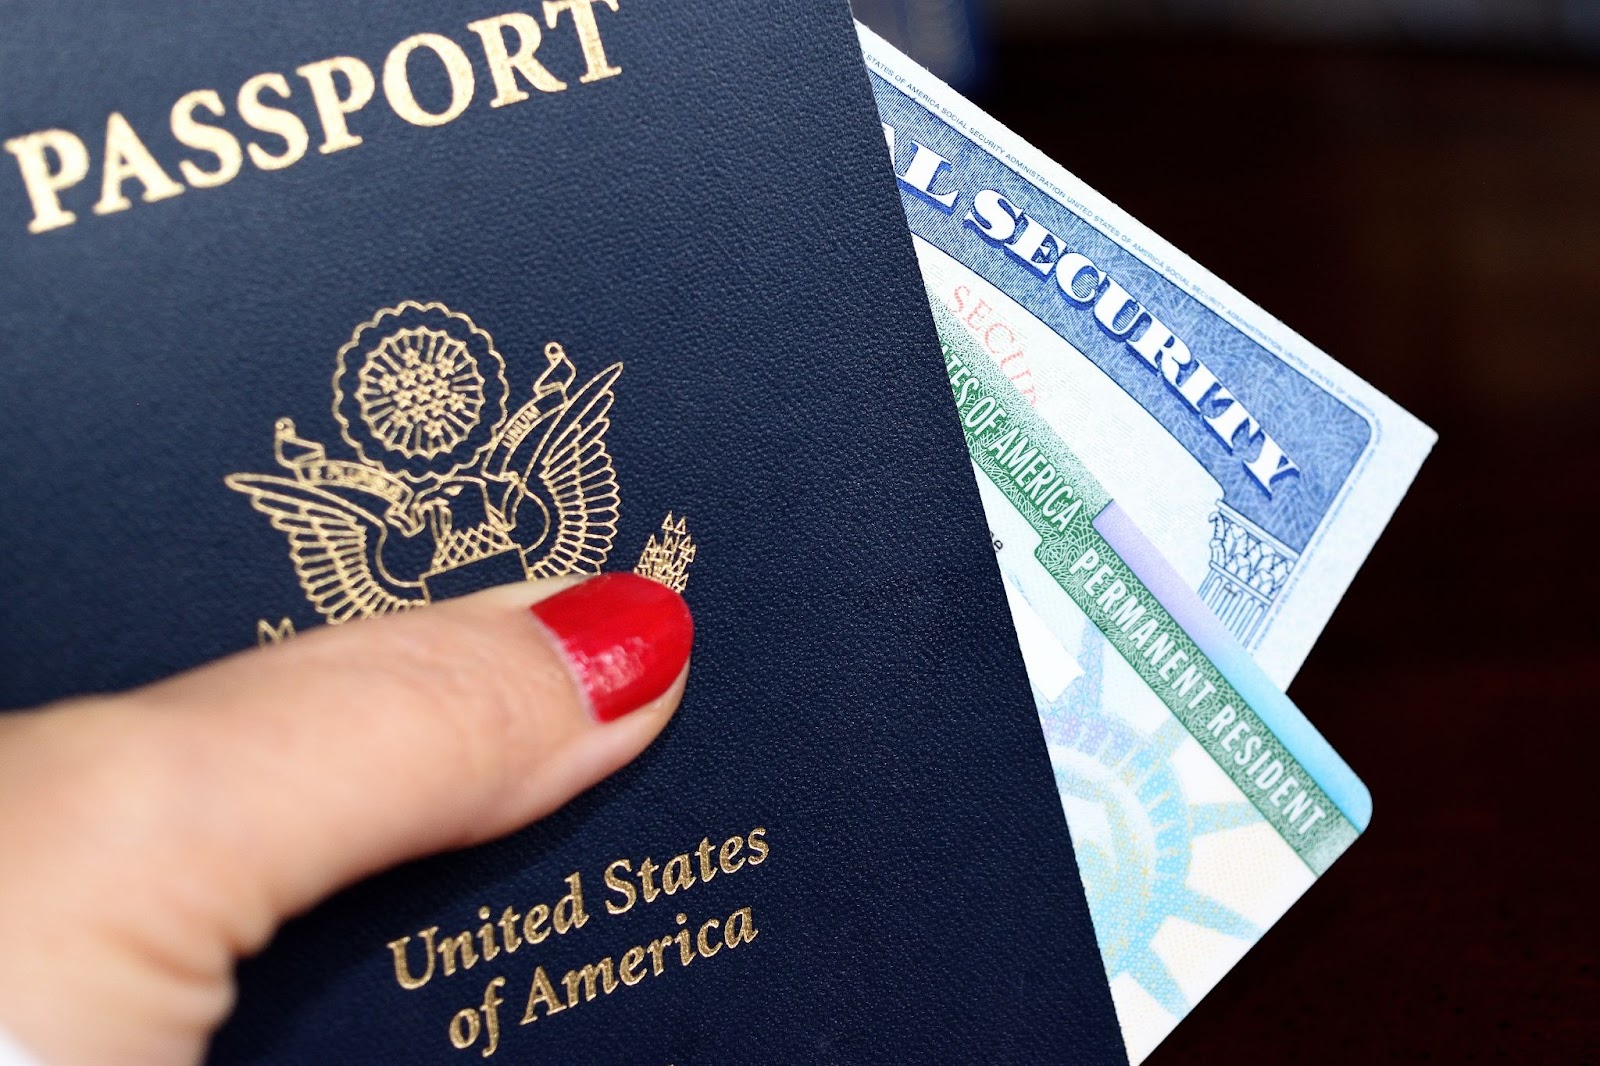 A woman's hand with red nail polish holding a passport and other legal documents for traveling